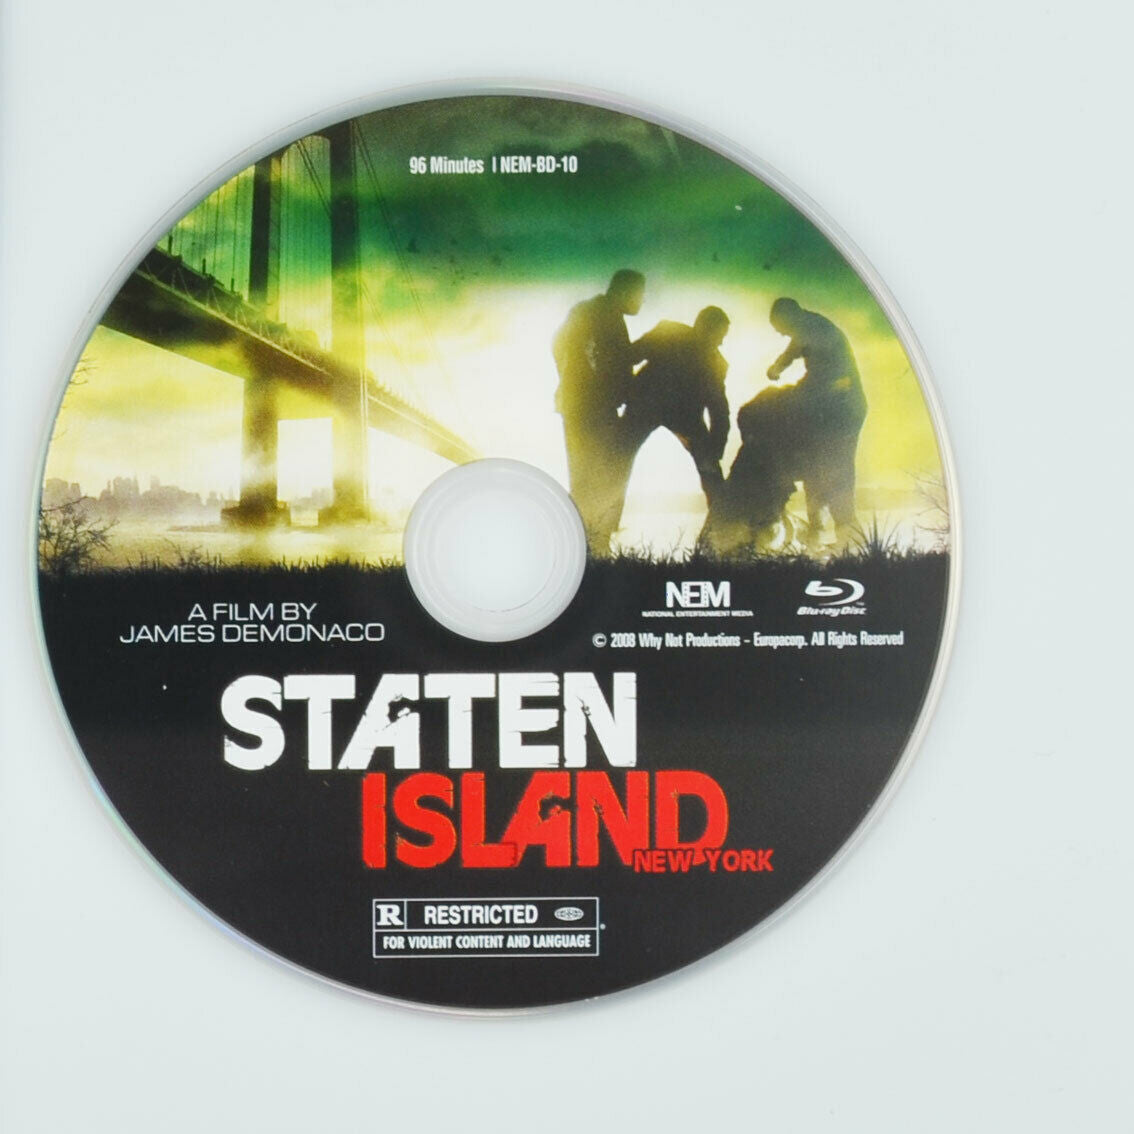 Staten Island (Blu-ray Disc, 2009) Ethan Hawke, Vincent D'Onofrio - DISC ONLY